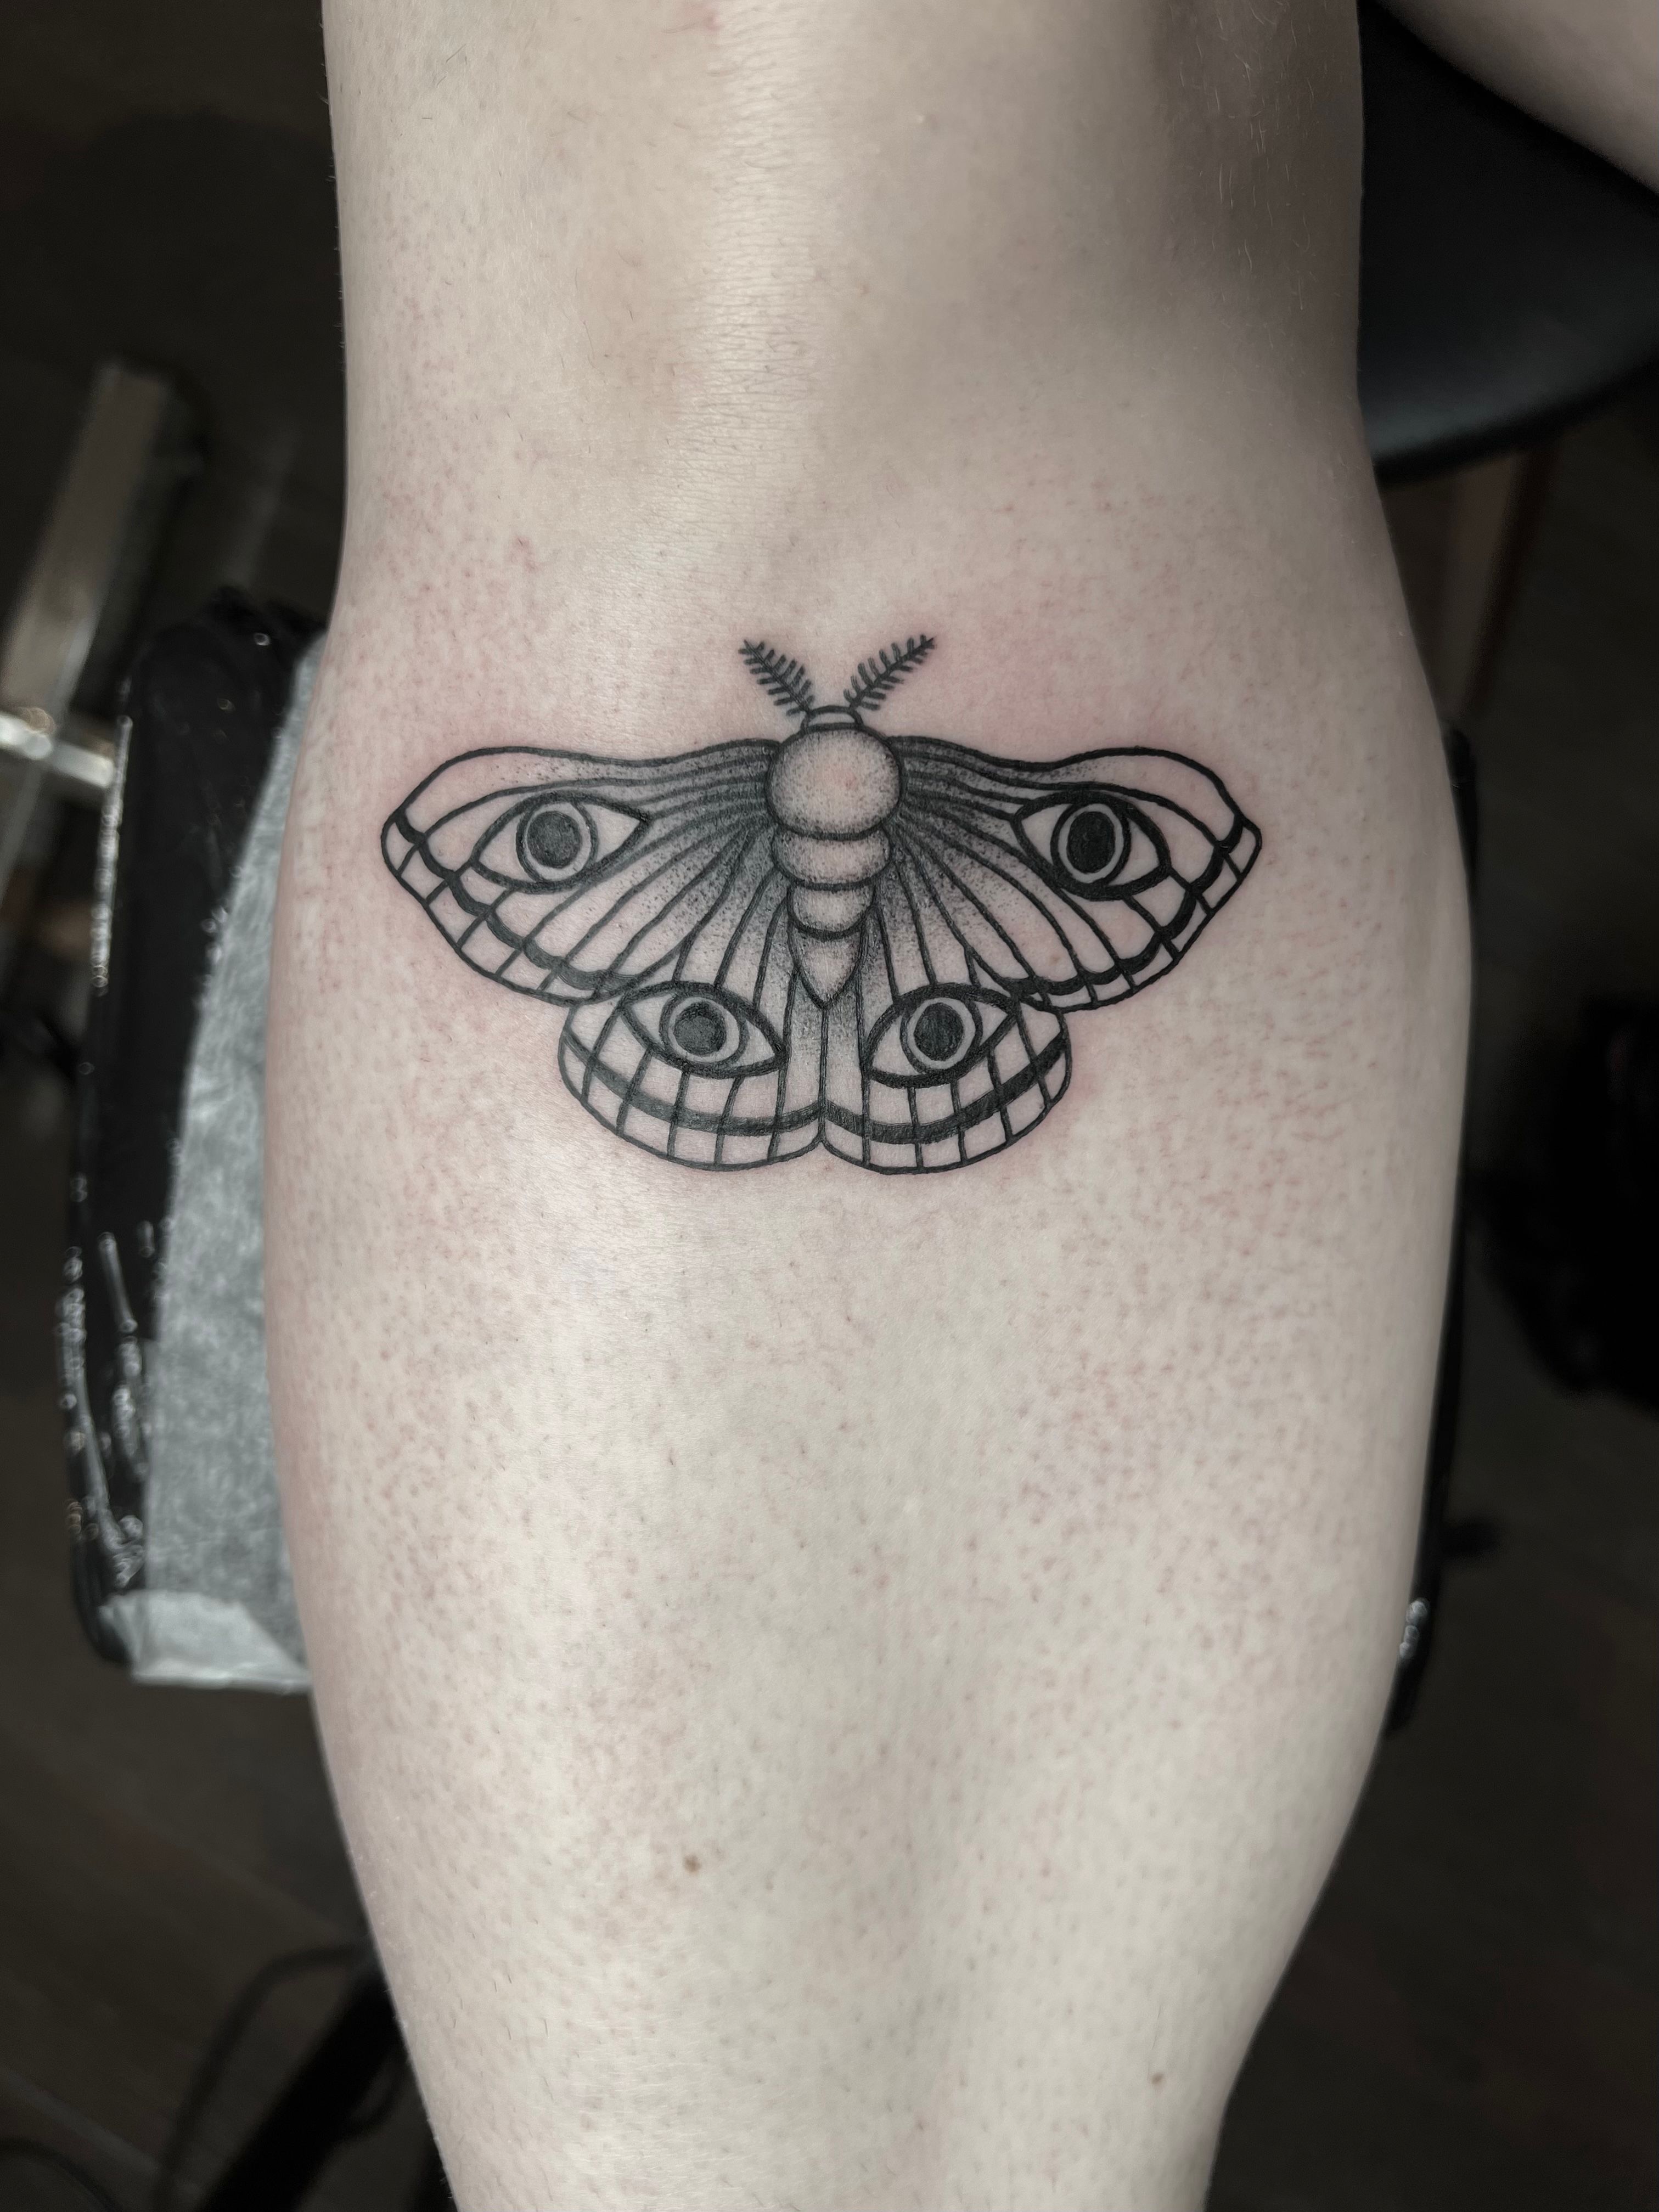 18 Incredible Insect Tattoos Youll Want to Collect  CafeMomcom